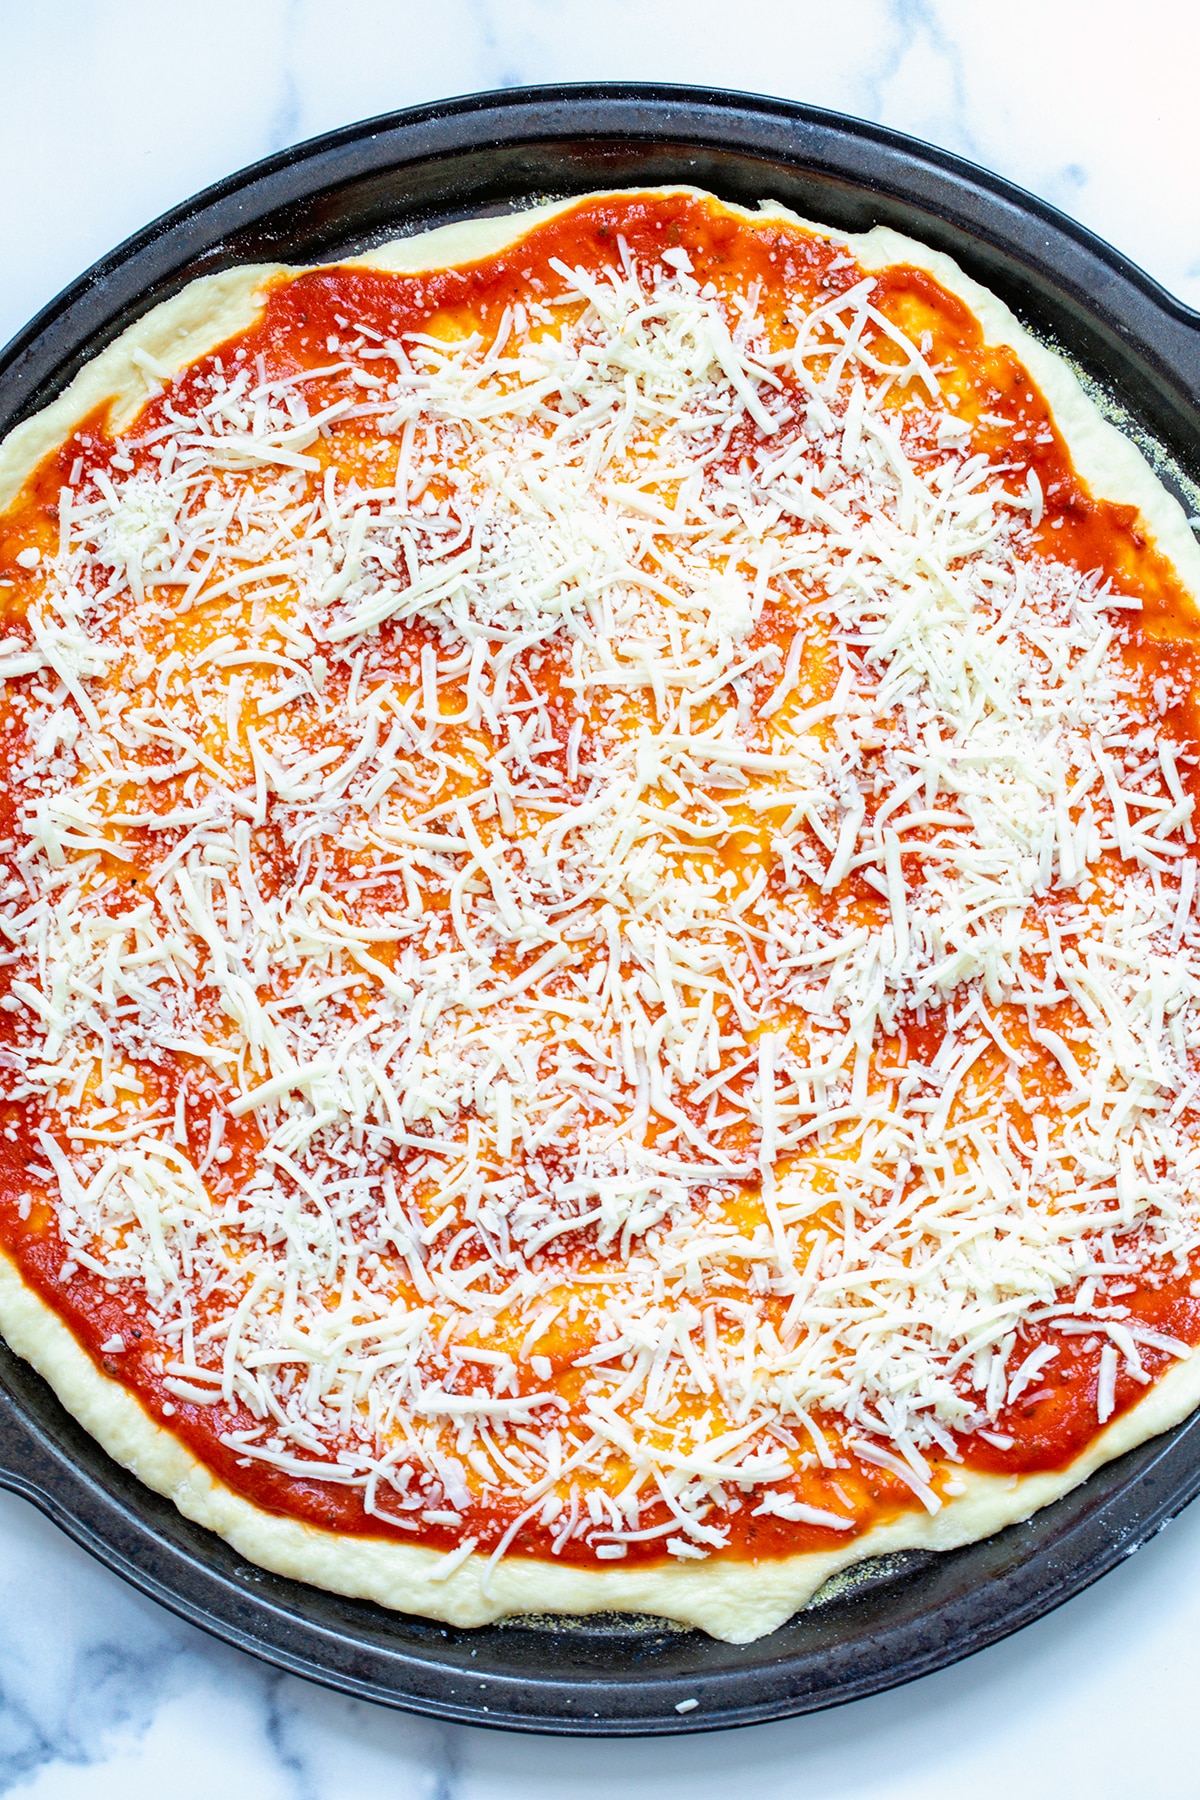 Pizza dough rolled on pan with tomato sauce and shredded cheese.